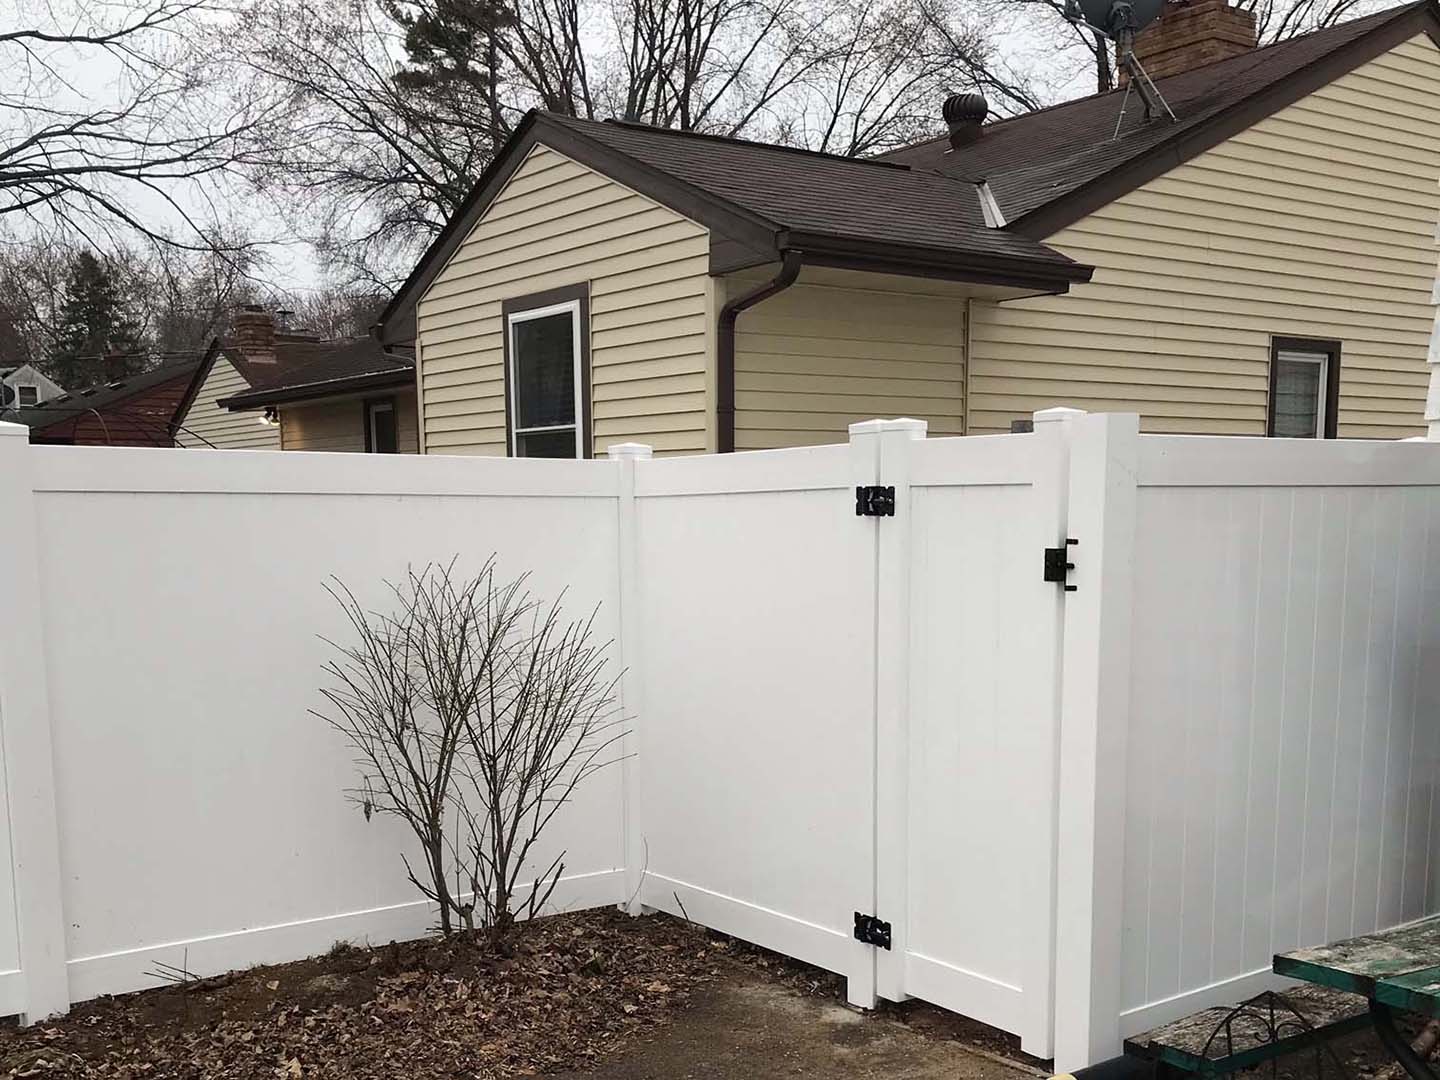 Andover Minnesota wood privacy fencing